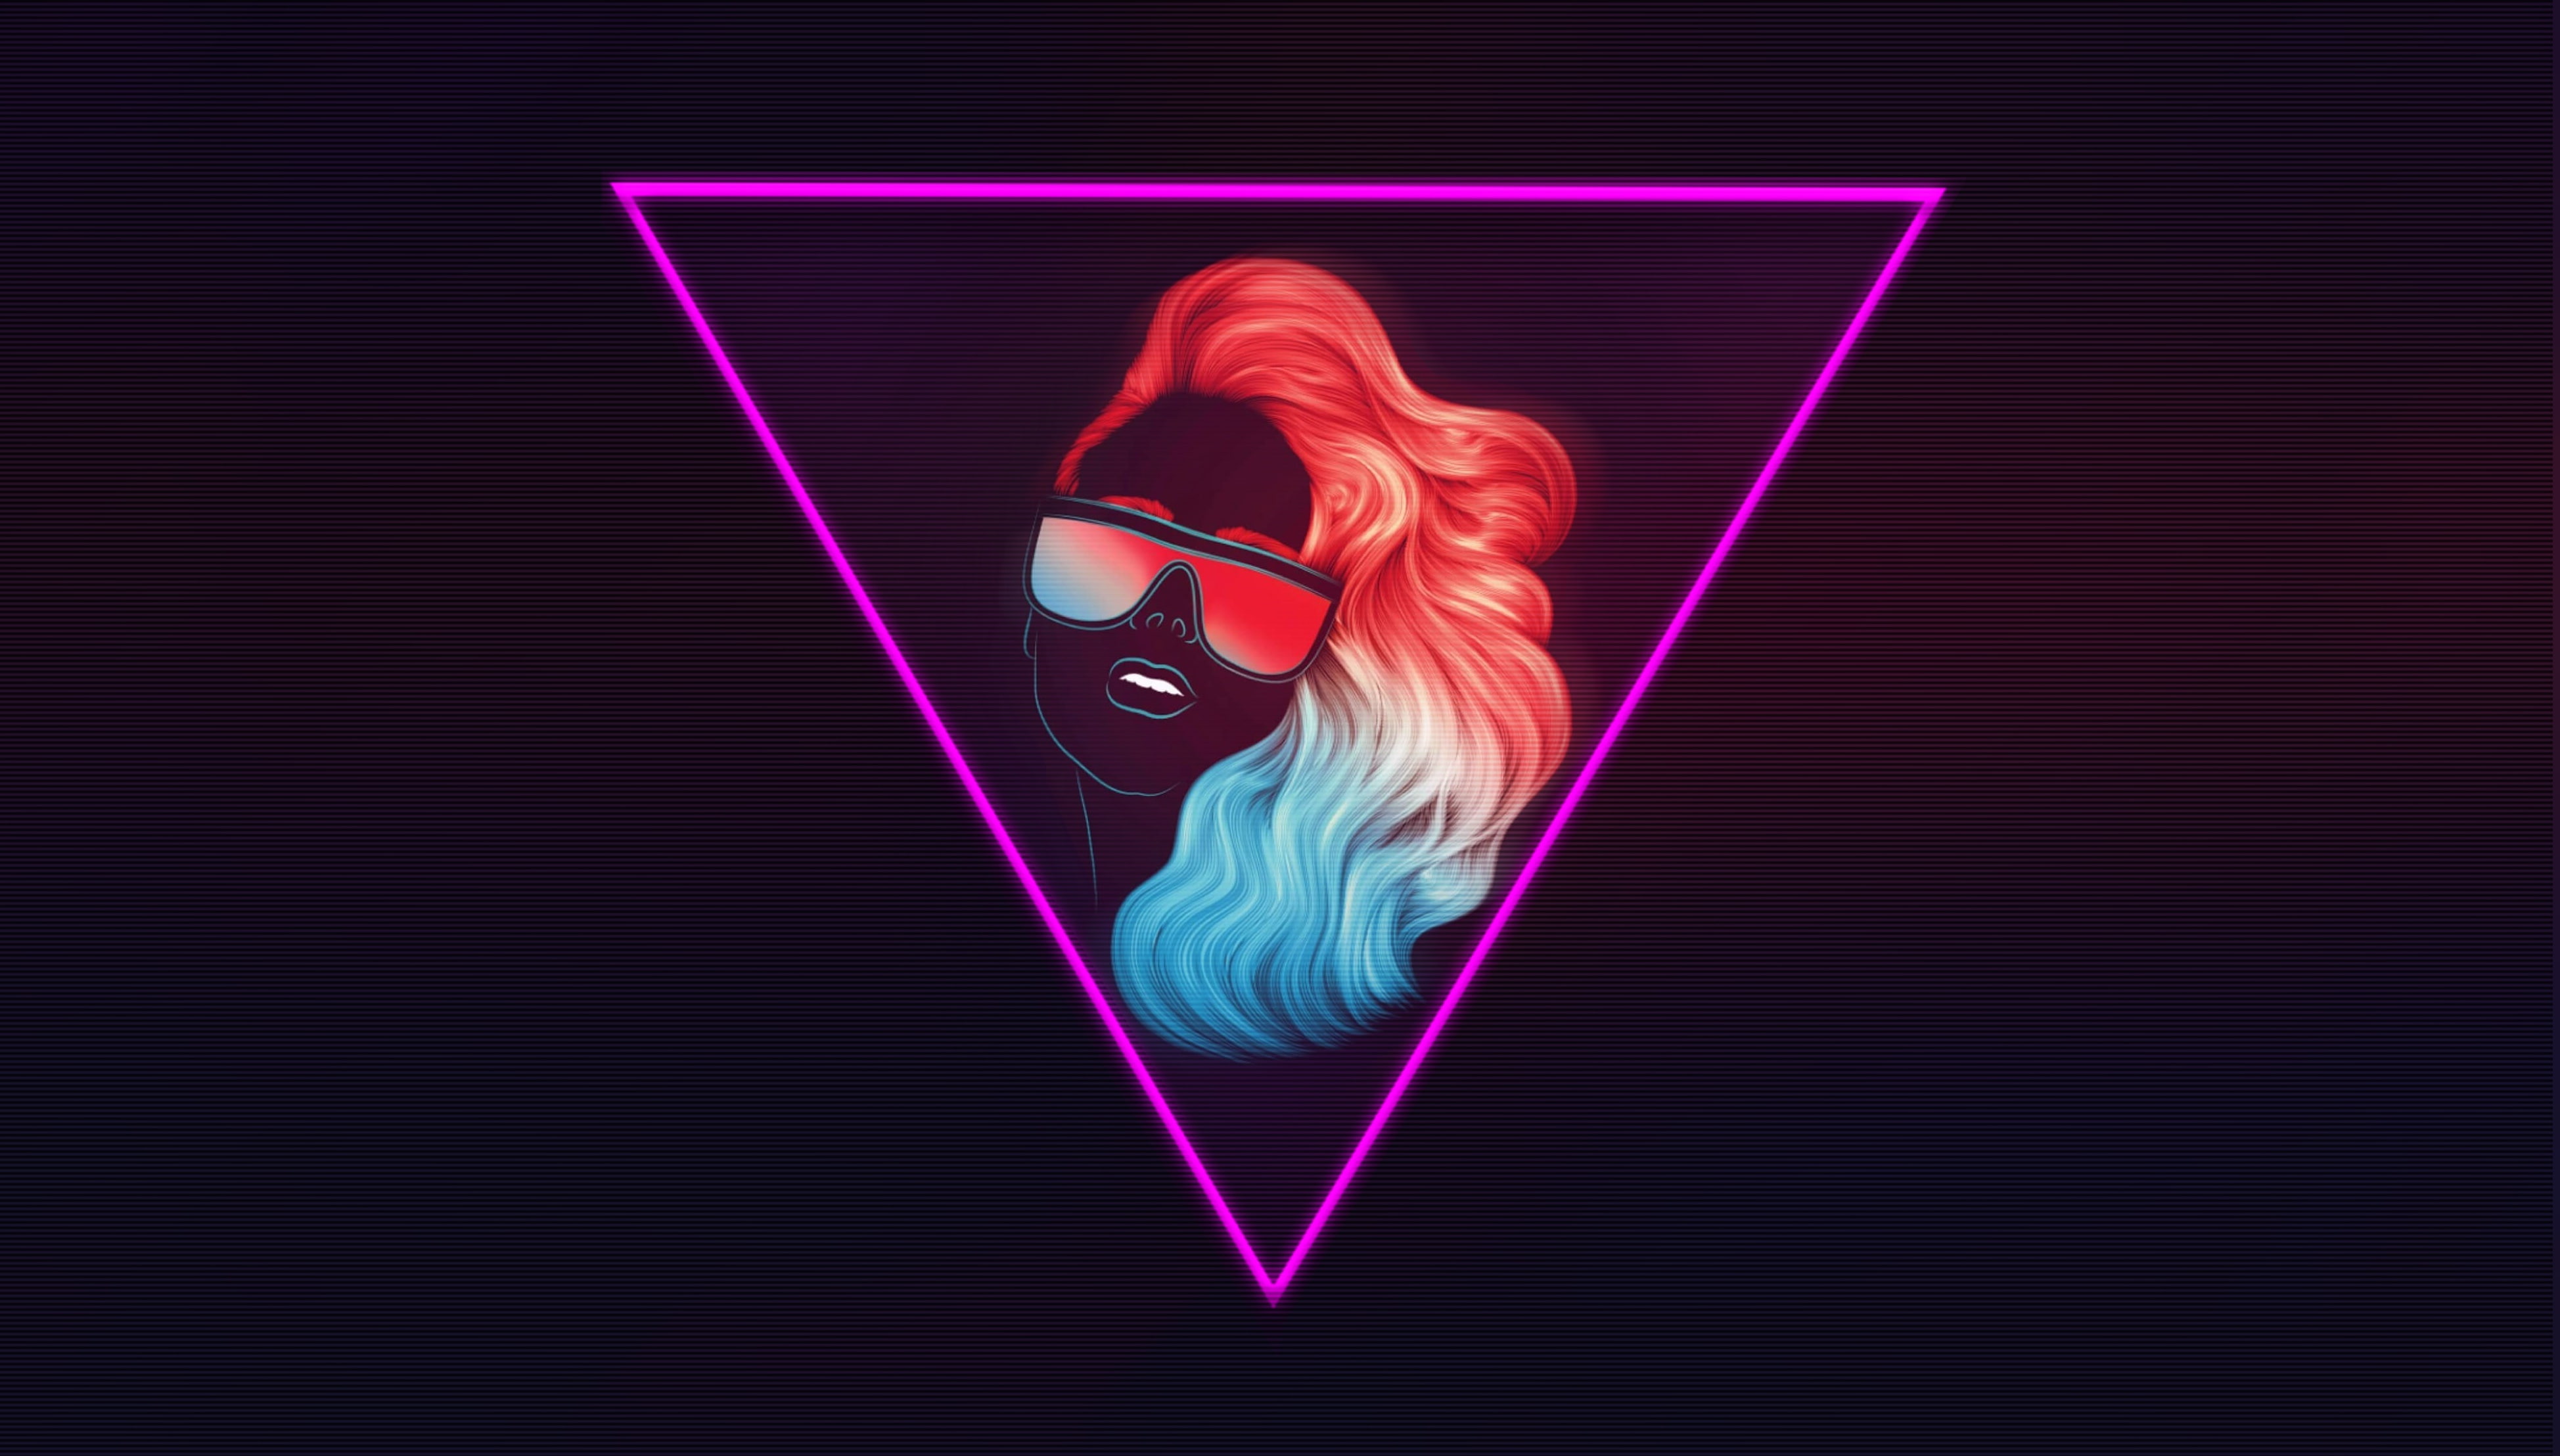 Girl, Music, Neon, Glasses, Background, Triangle, 80s, 80's